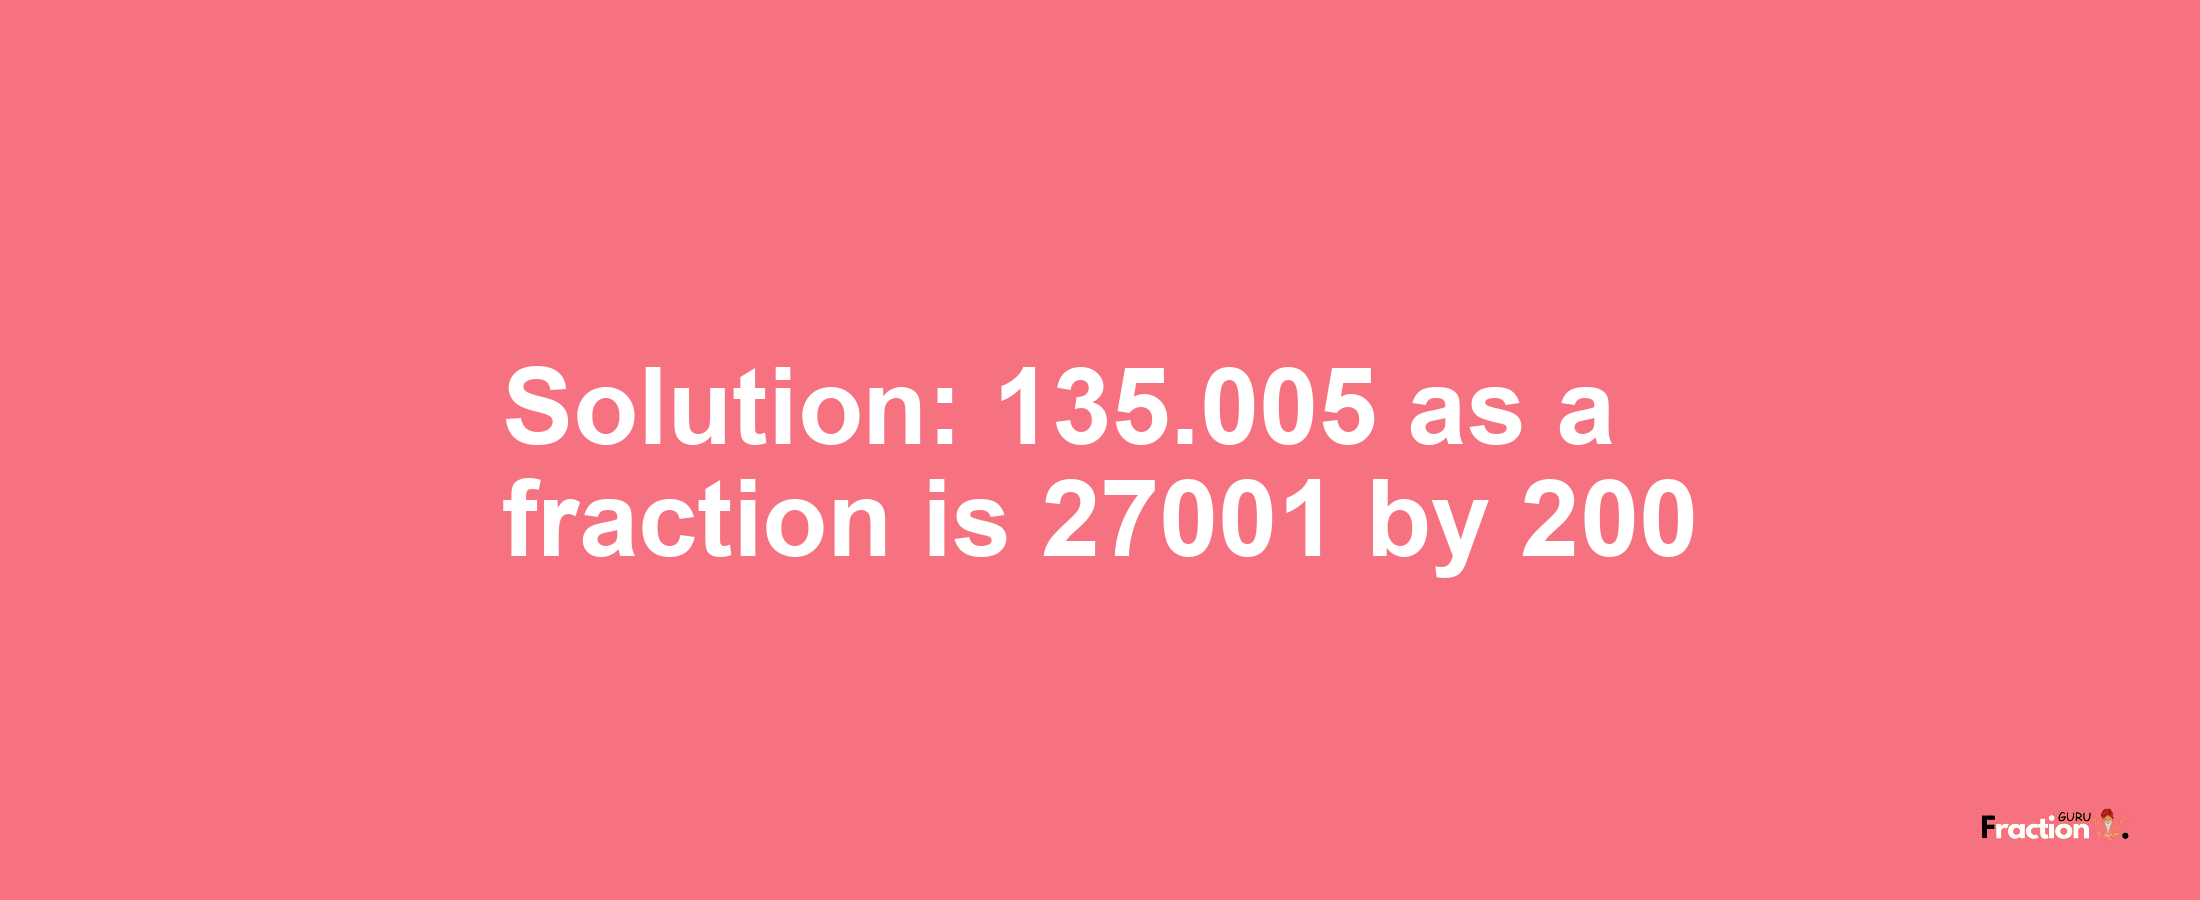 Solution:135.005 as a fraction is 27001/200